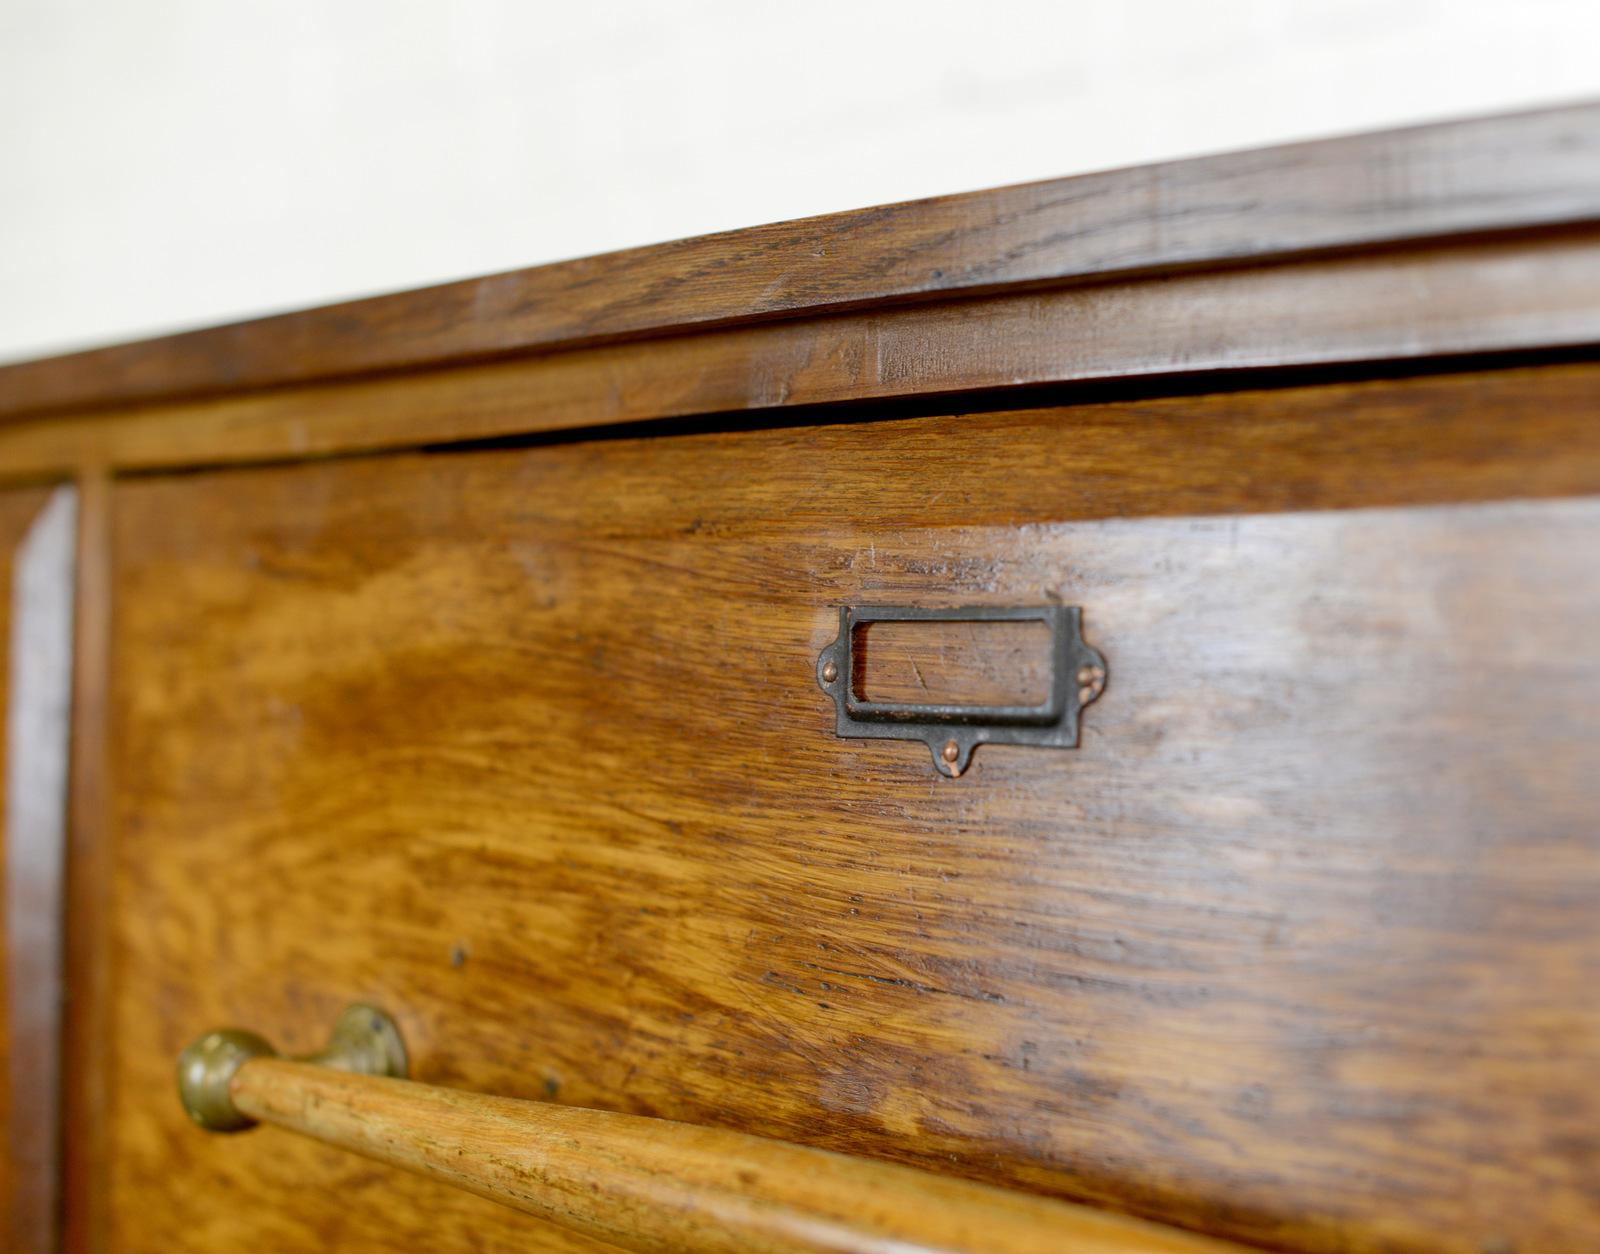 Large English tailors drawers, circa 1920s

- Oak frame, top and drawers
- Bevelled drawer fronts with dovetail joints
- Oak bar handles
- Copper card holders
- Originally used in a mens tailors in London and would have house rolls of cloth
-